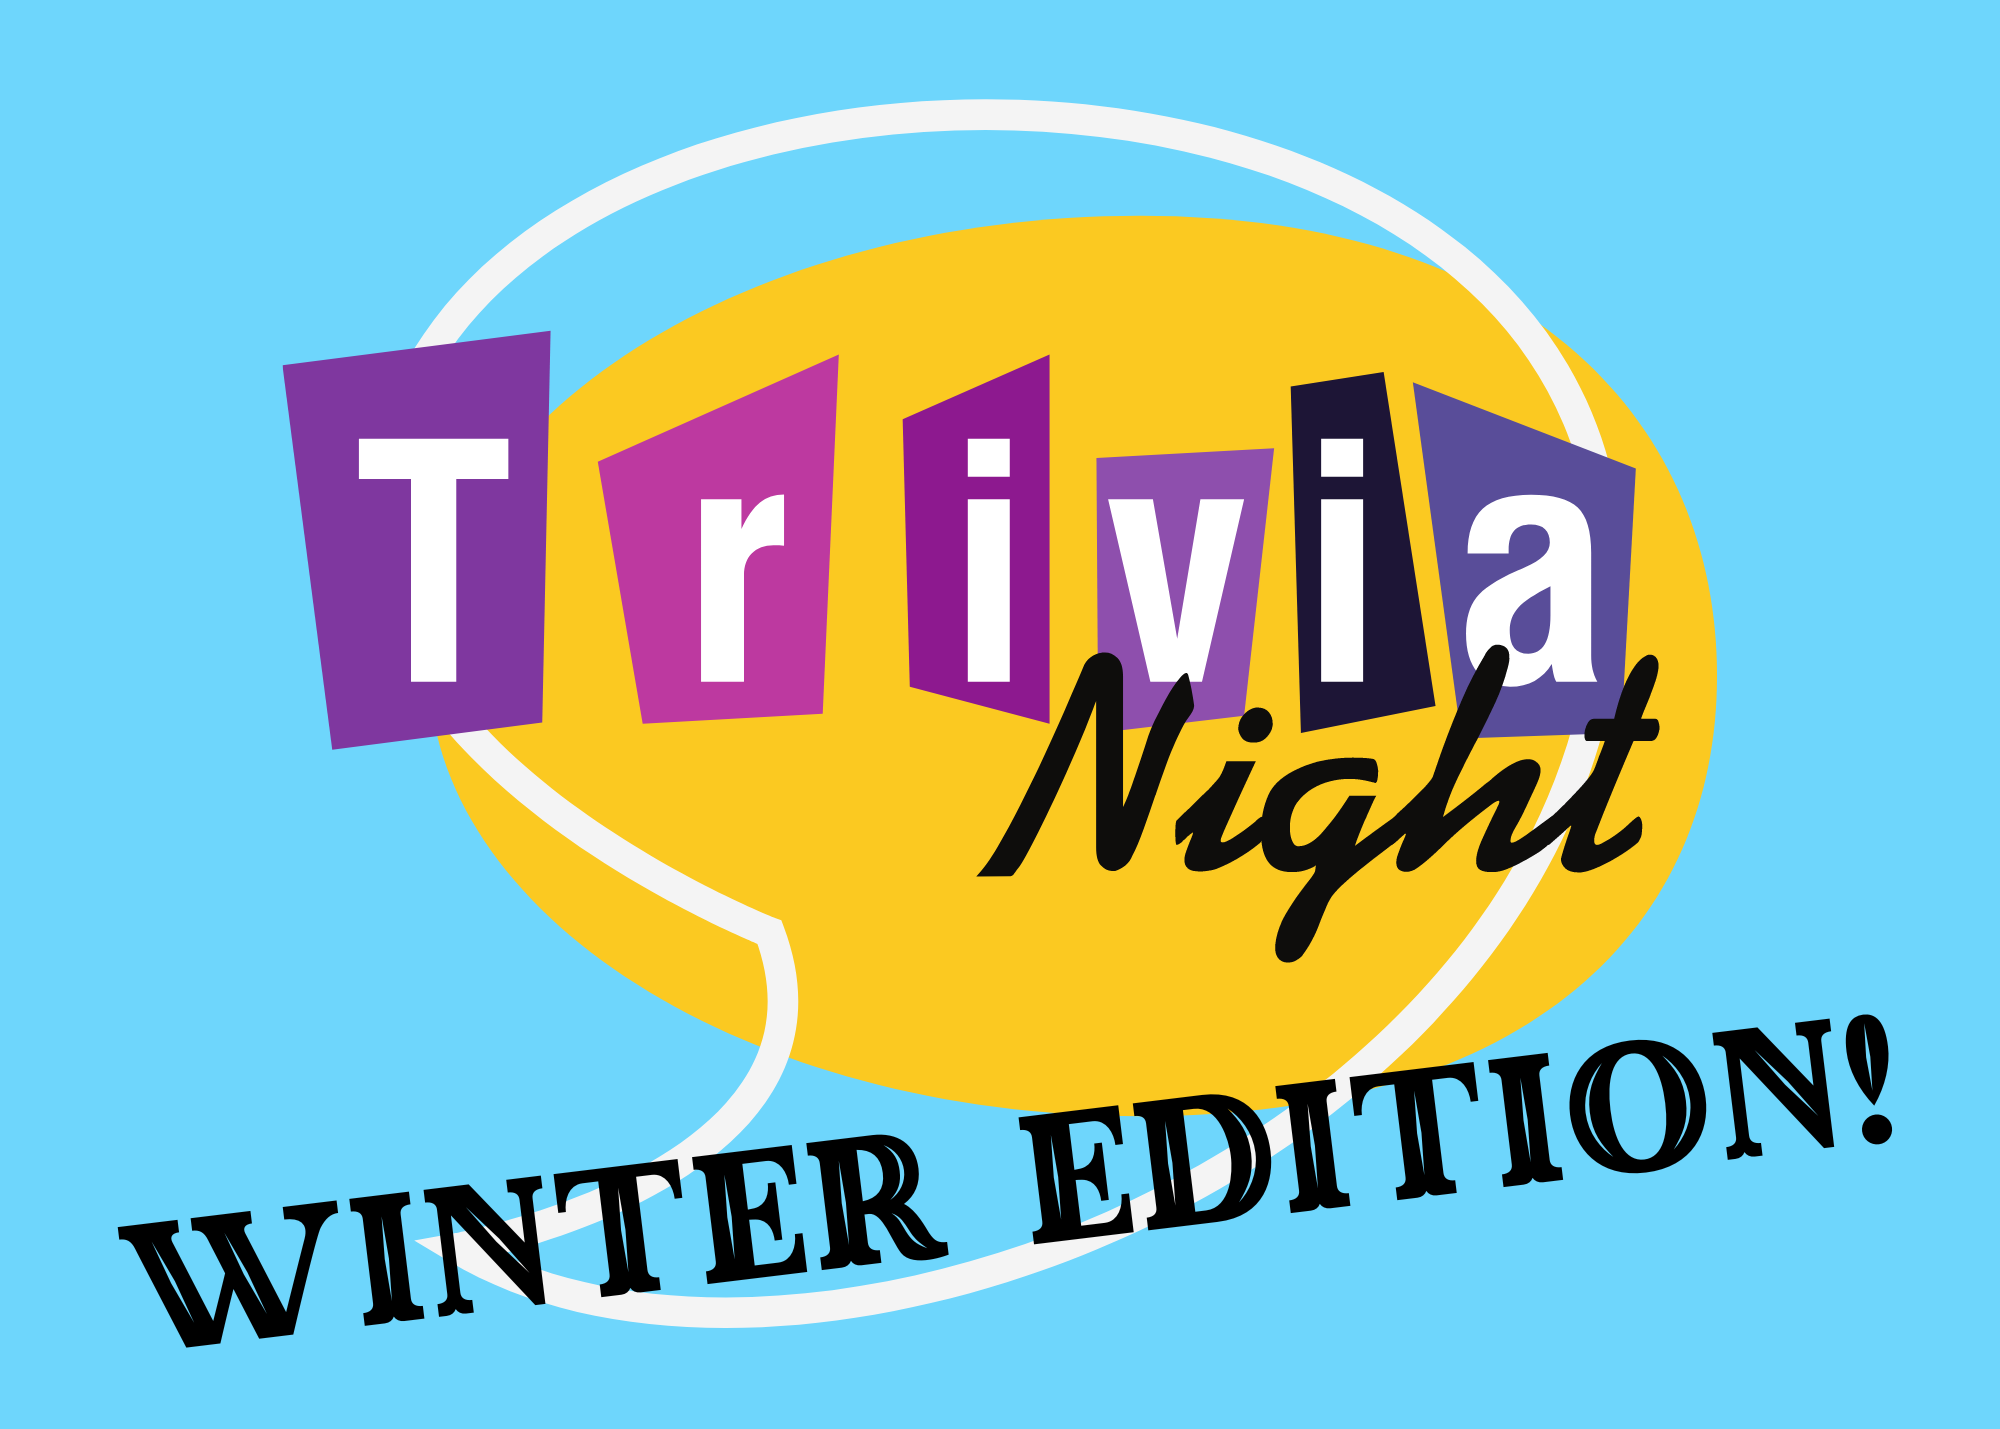 The text "Trivia Night Winter Edition" on a yellow speech bubble with a light blue background. The text has a retro game show vibe.